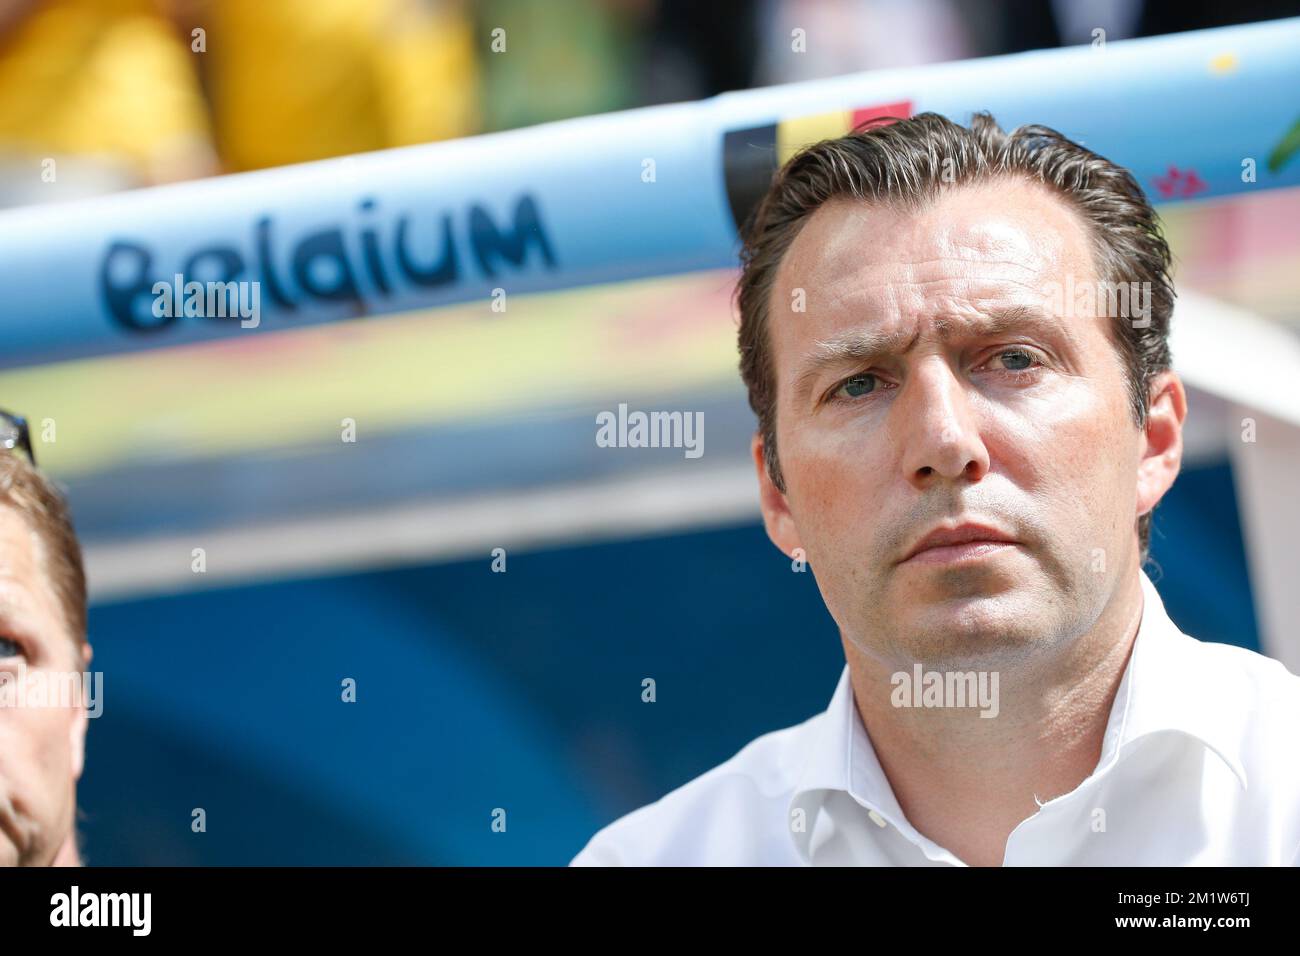 Belgium's head coach Marc Wilmots pictured prior to the quarter final match between Belgian national soccer team Red Devils and Argentina, in Estadio Nacional Mane Garrincha, in Brasilia, Brazil, during the 2014 FIFA World Cup, Saturday 05 July 2014. BELGA PHOTO BRUNO FAHY Stock Photo